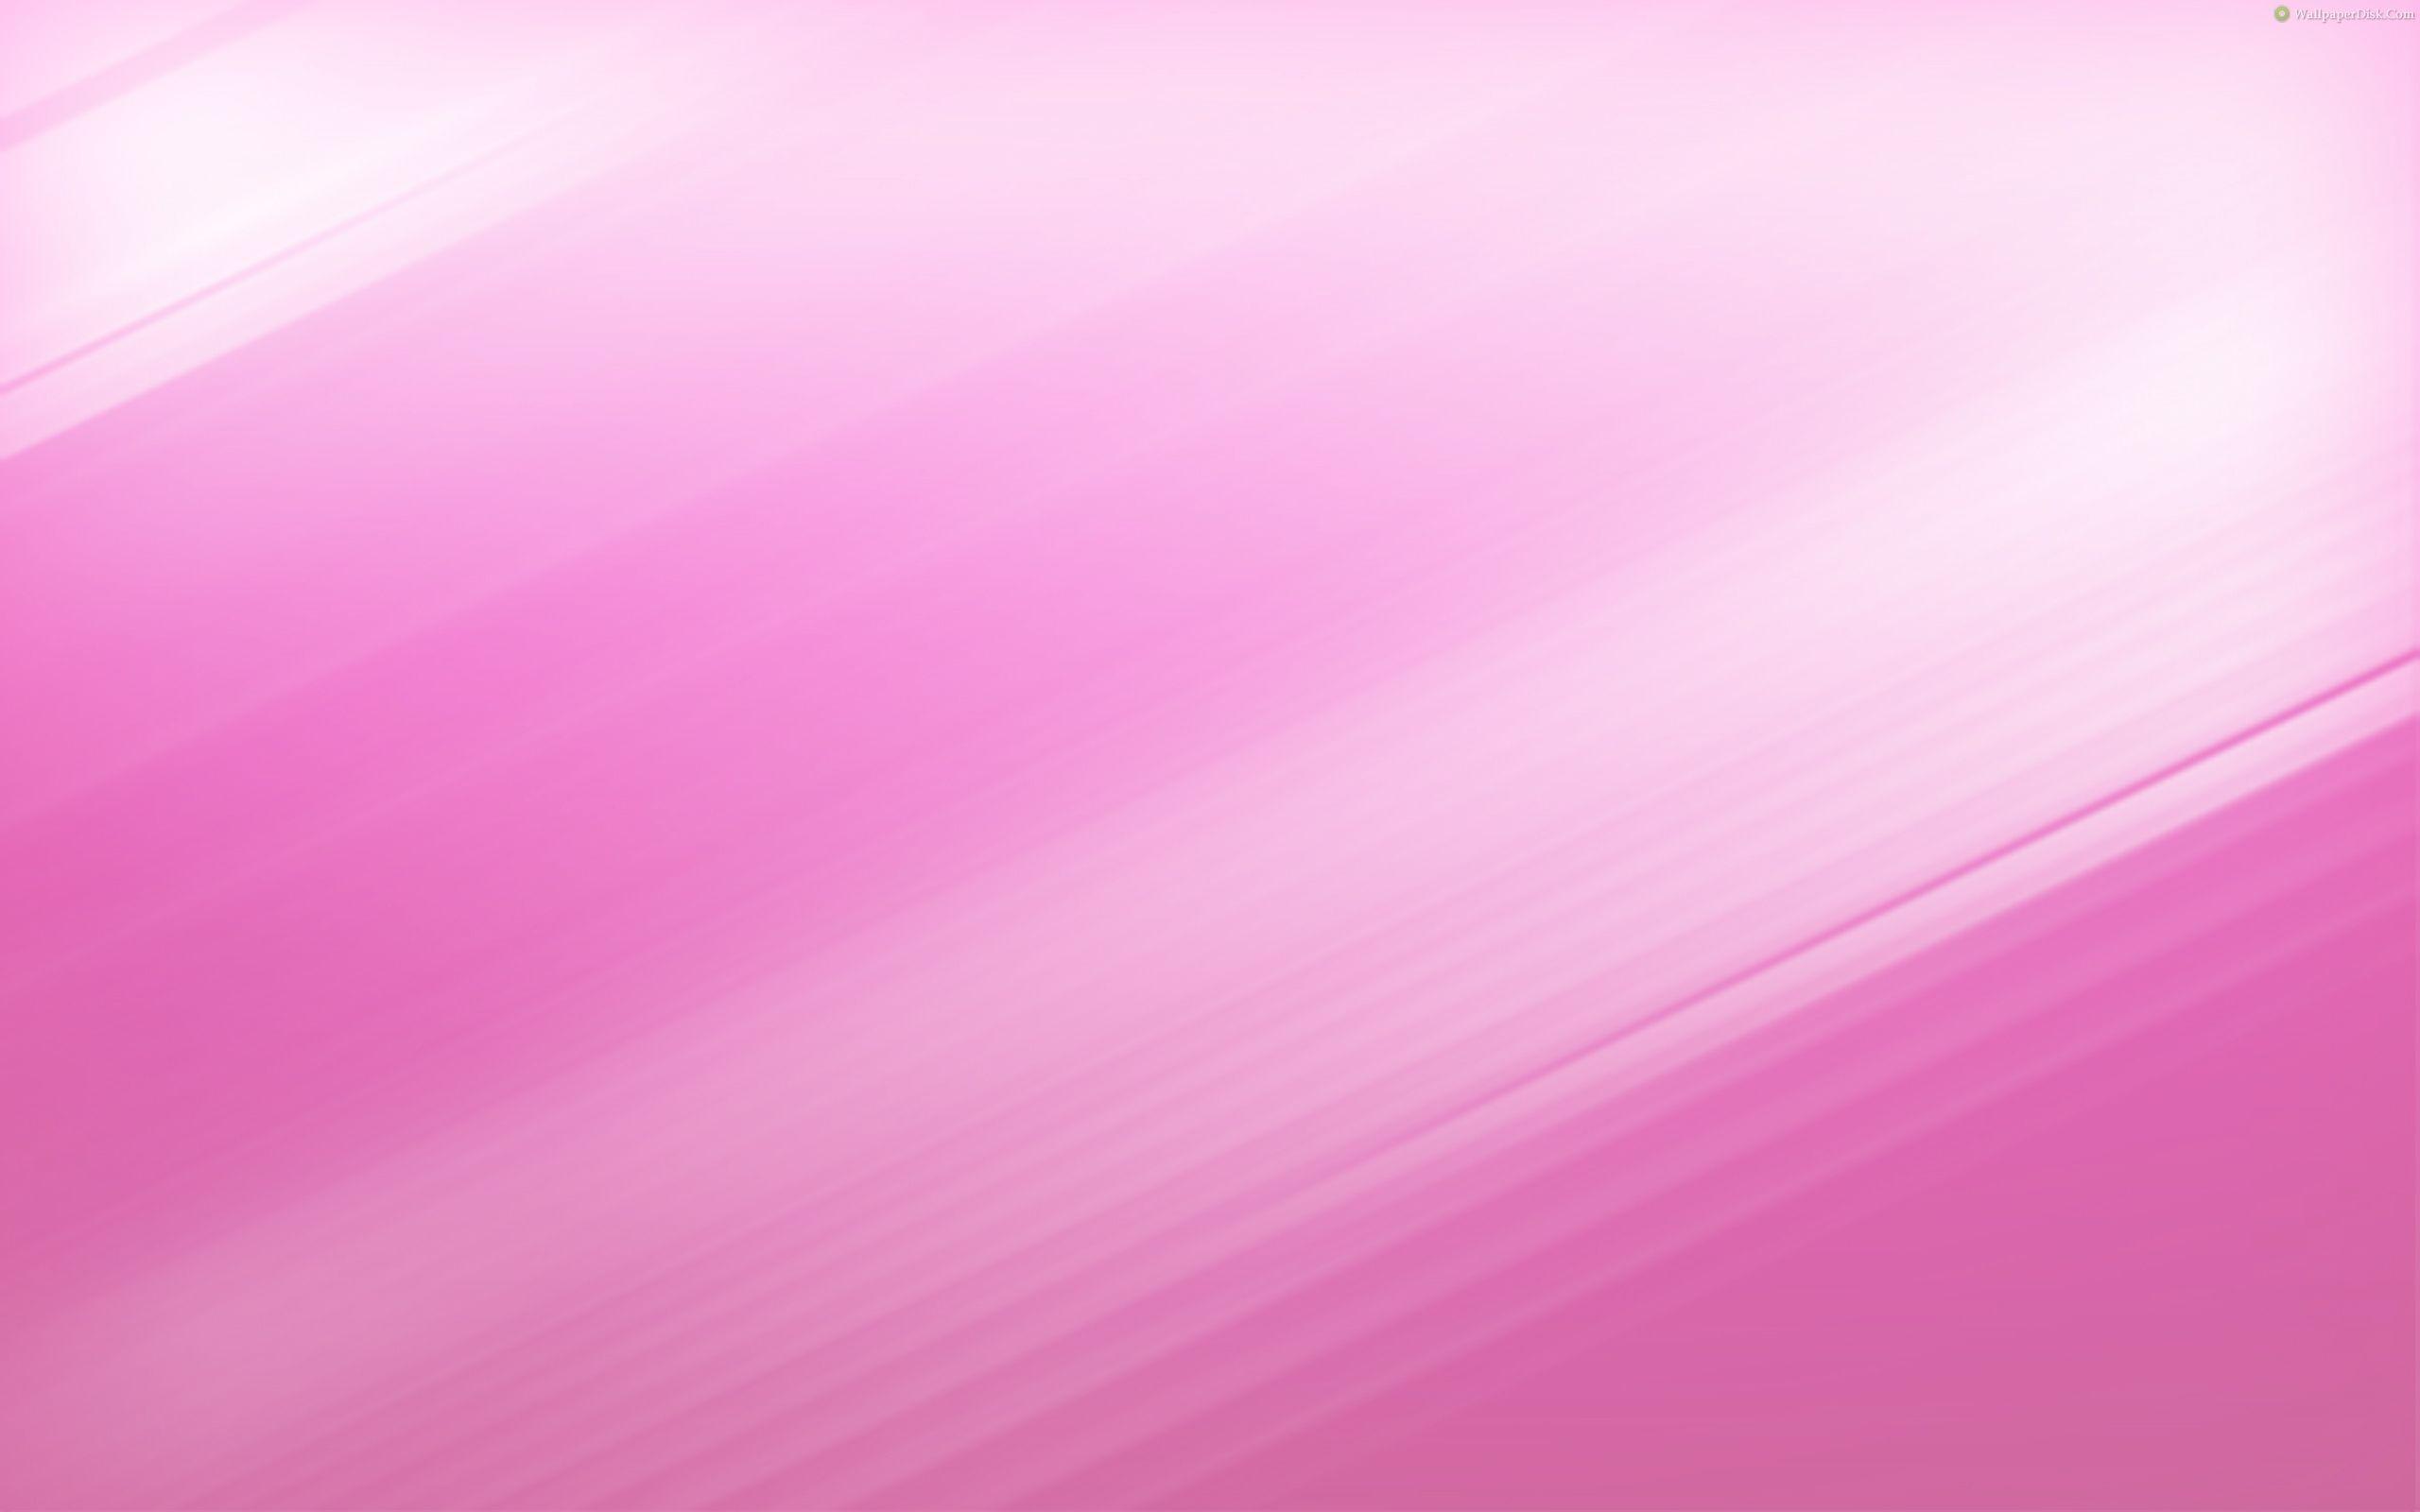 Background Pink 55 324244 High Definition Wallpaper. wallalay